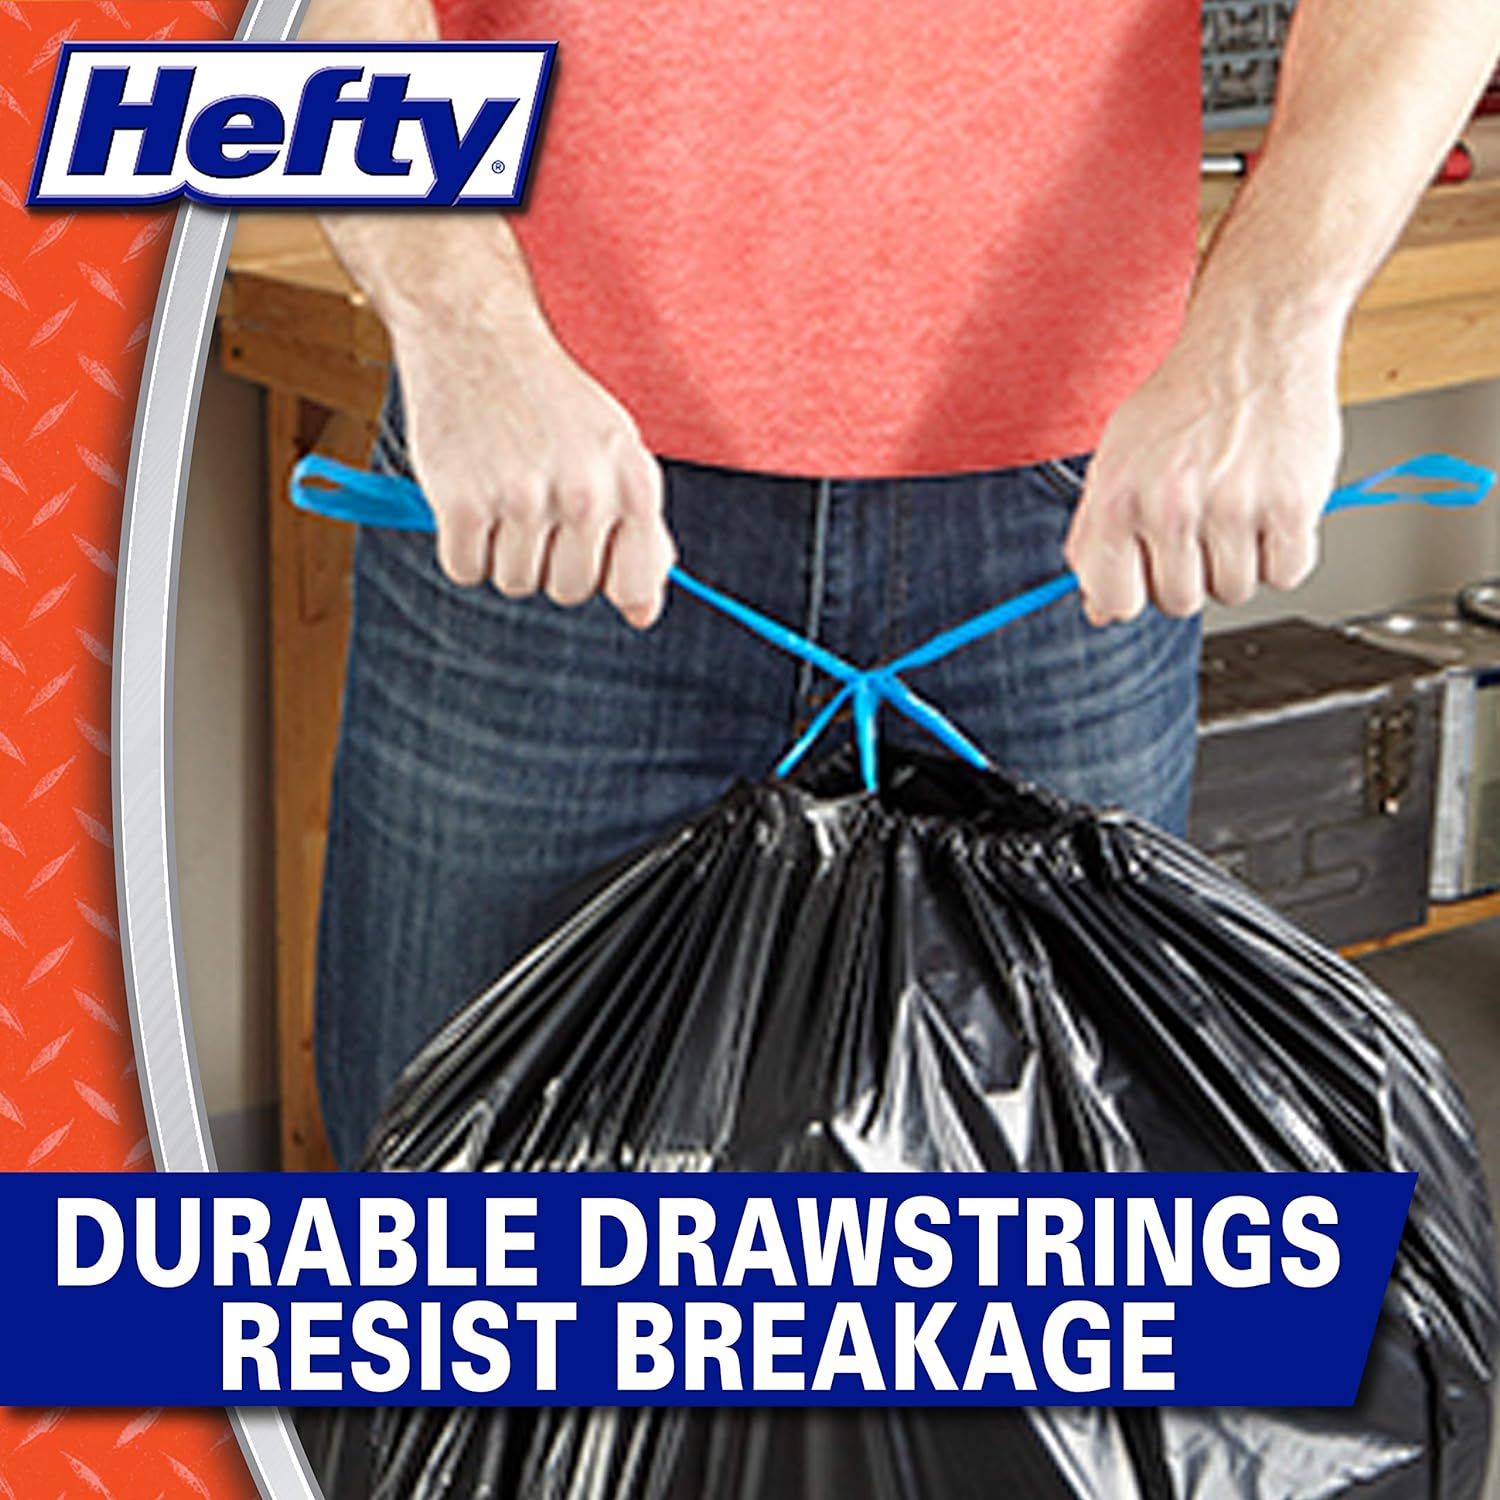 Wholesale prices with free shipping all over United States Hefty Strong Large Trash Bags, 30 Gallon, 56 Count - Steven Deals